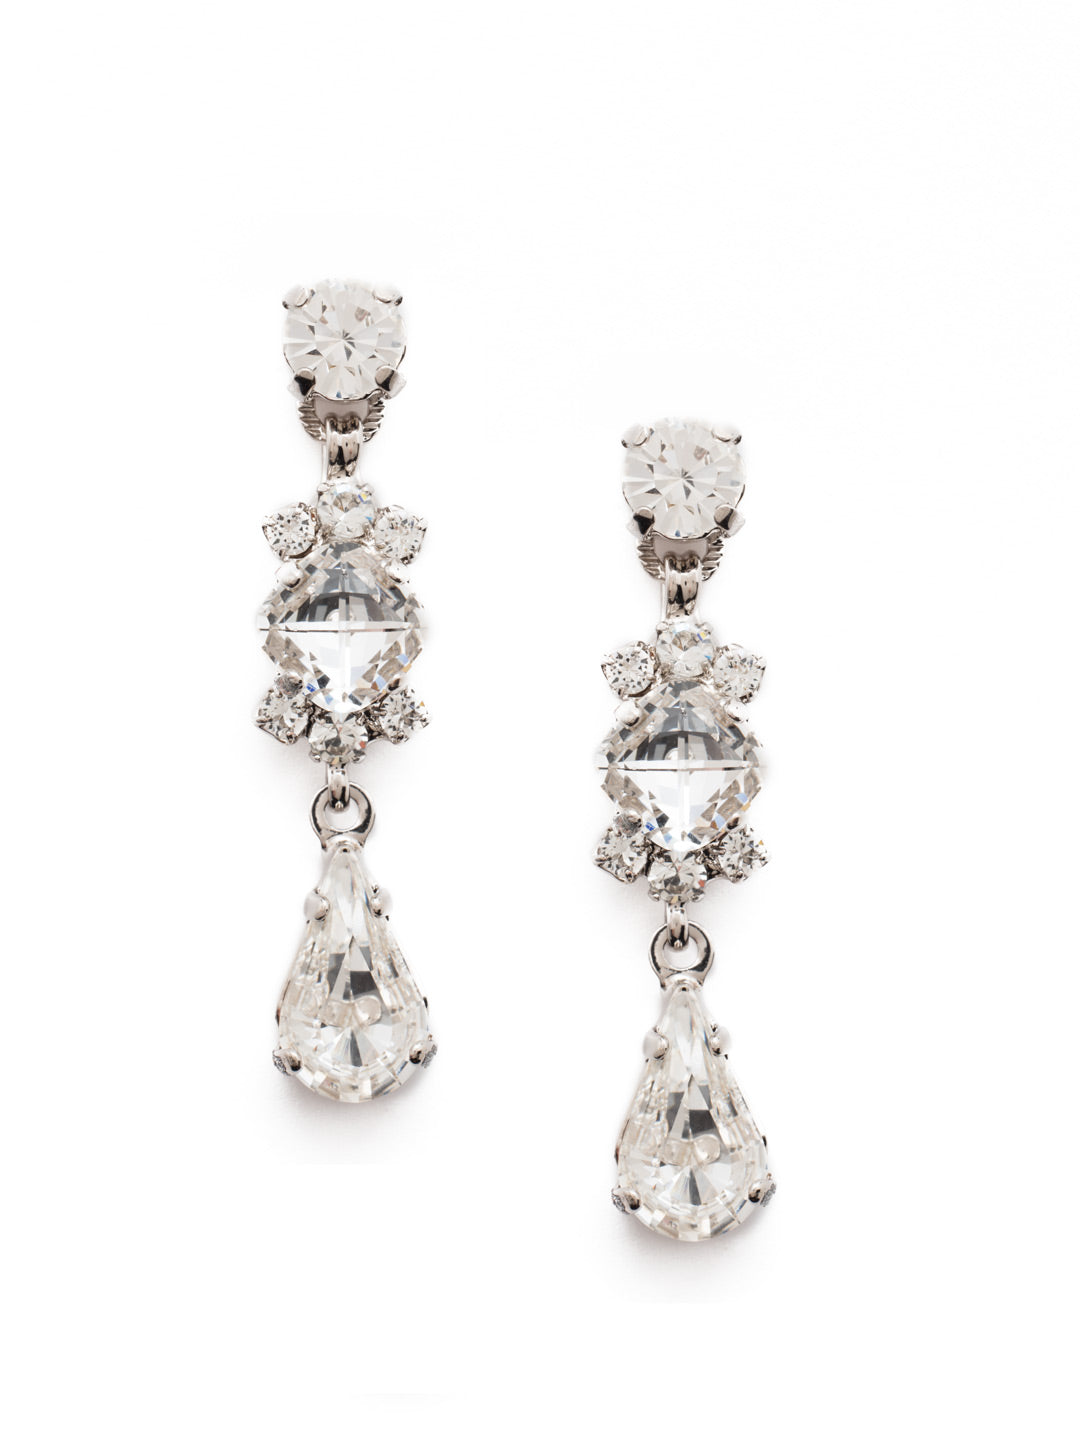 Saffron Dangle Earrings - EDS1RHCRY - <p>This demure earring boasts round, oval, teardrop and cushion cut crystals accented by a decorative chain. From Sorrelli's Crystal collection in our Palladium Silver-tone finish.</p>